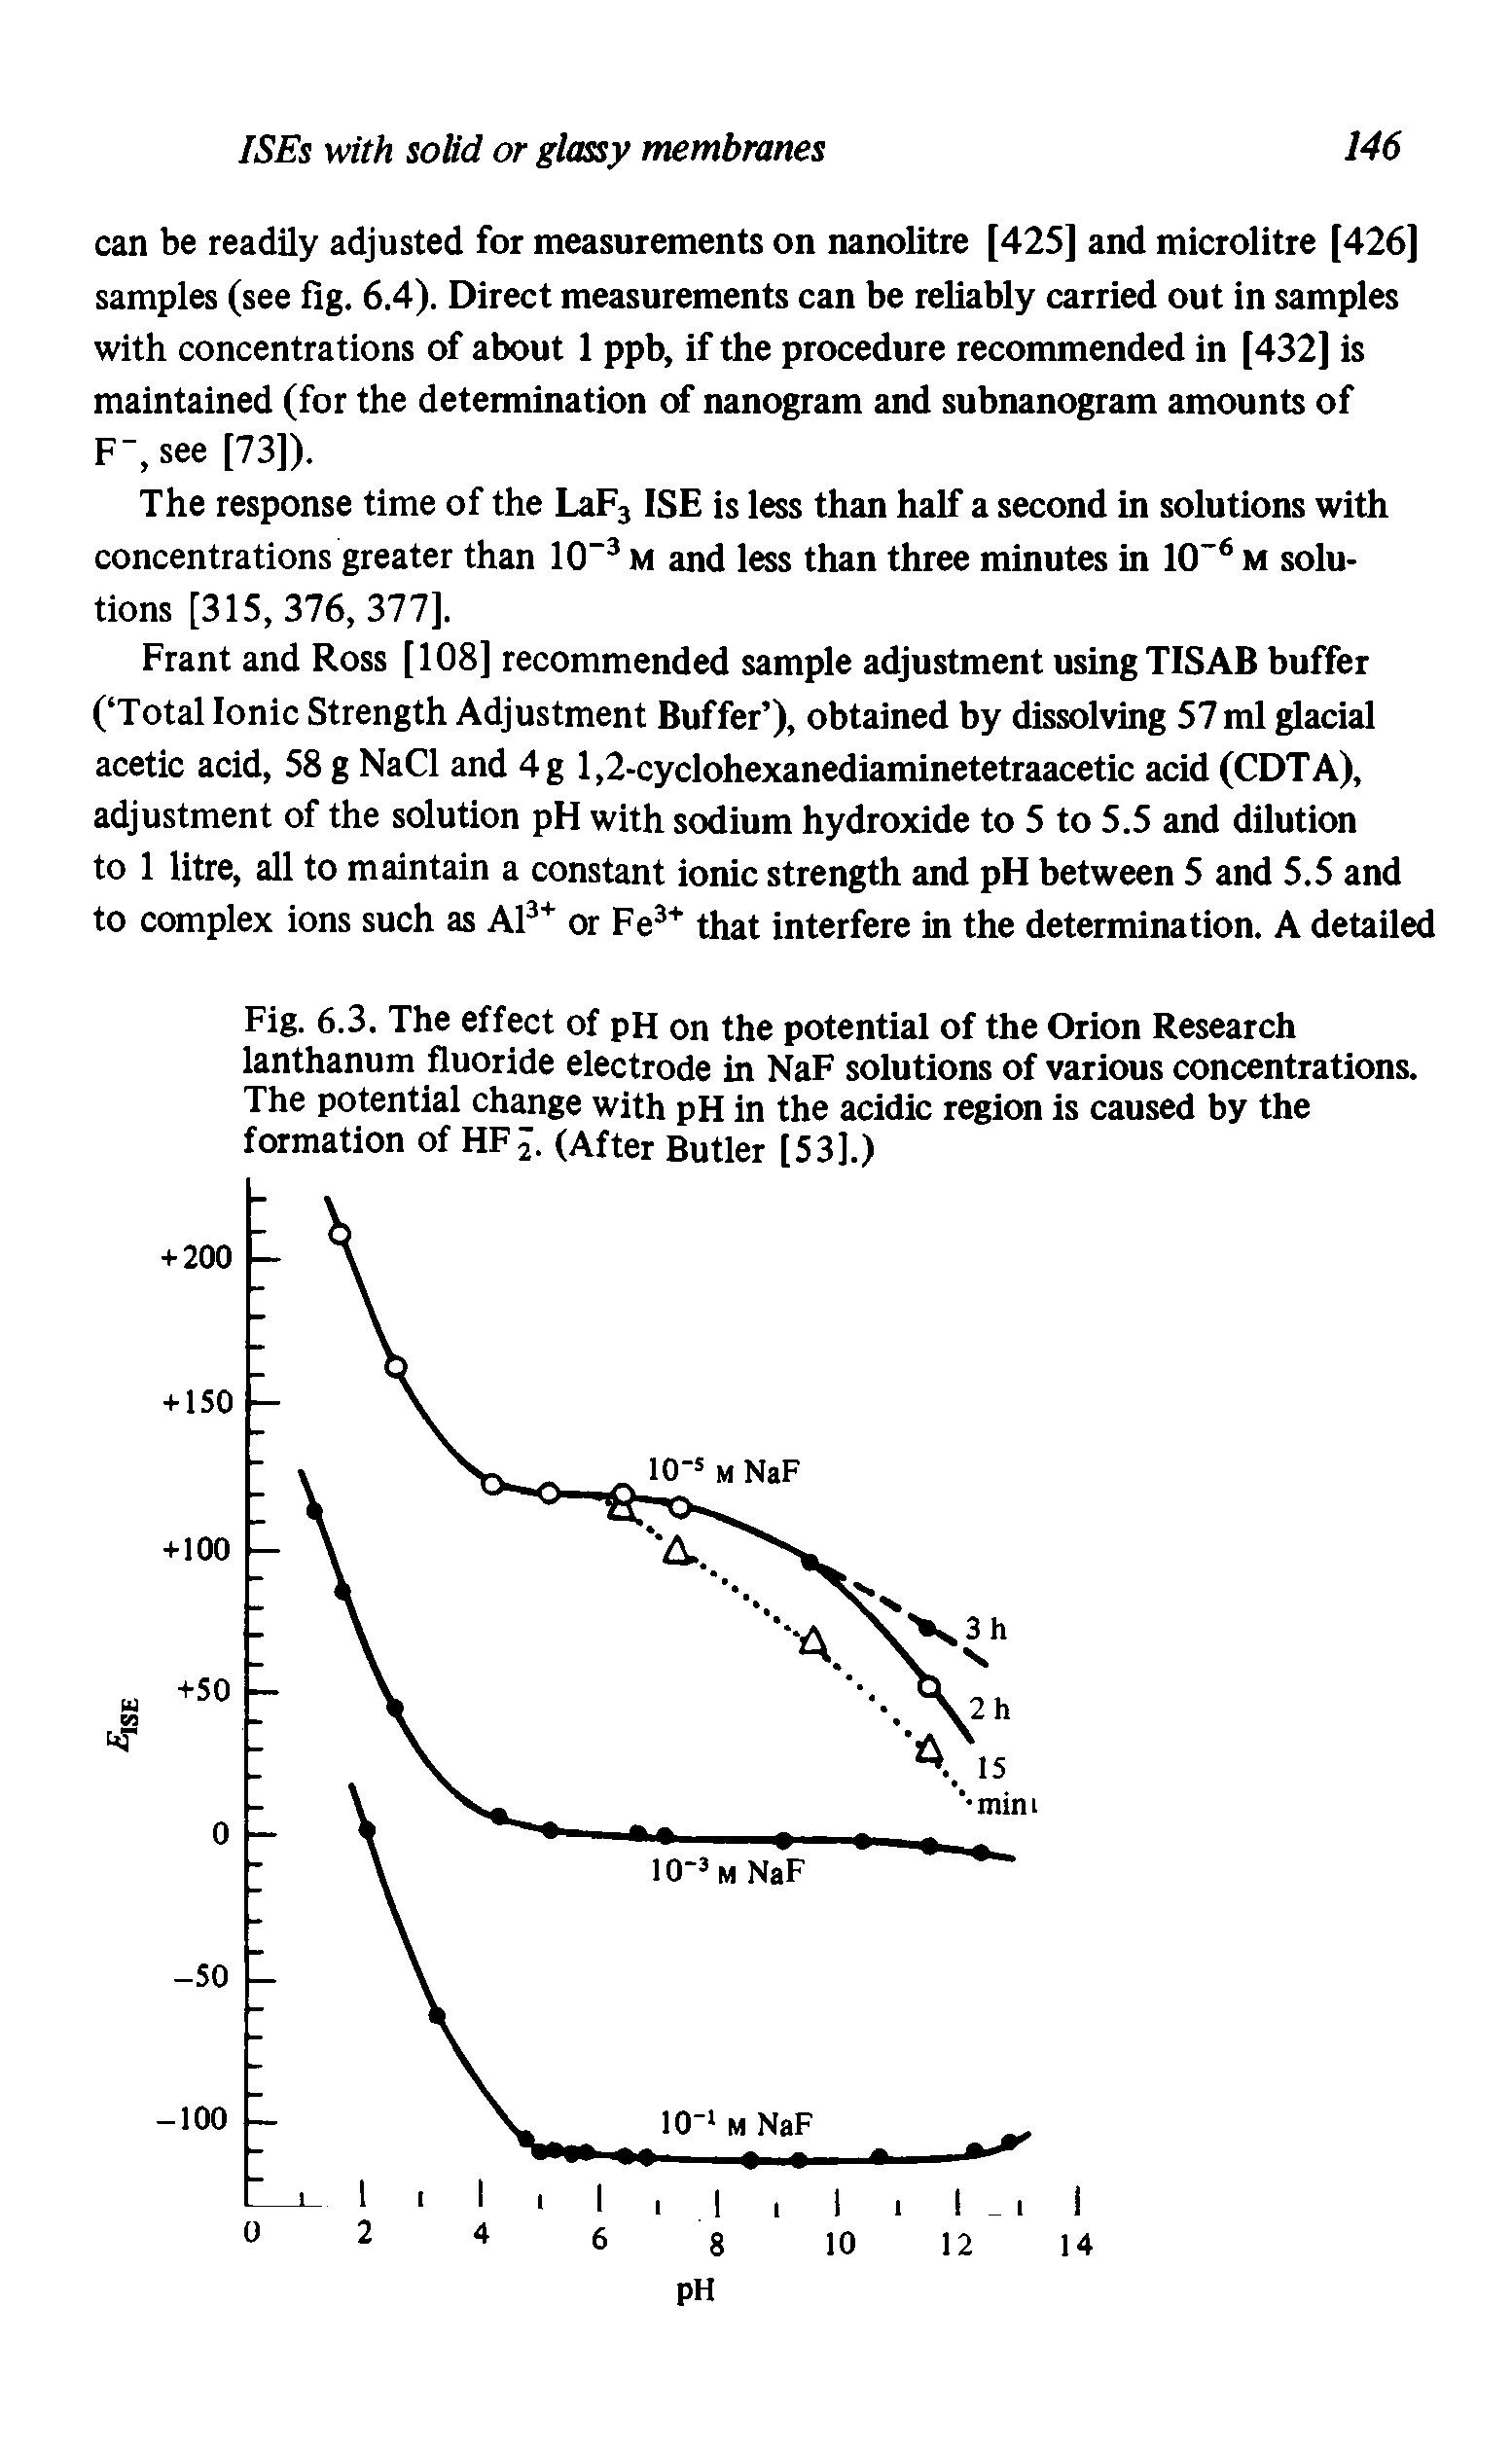 Fig. 6.3. The effect of pH on the potential of the Orion Research lanthanum fluoride electrode in NaF solutions of various concentrations. The potential change with pH in the acidic region is caused by the formation of HFJ. (After Butler [53].)...